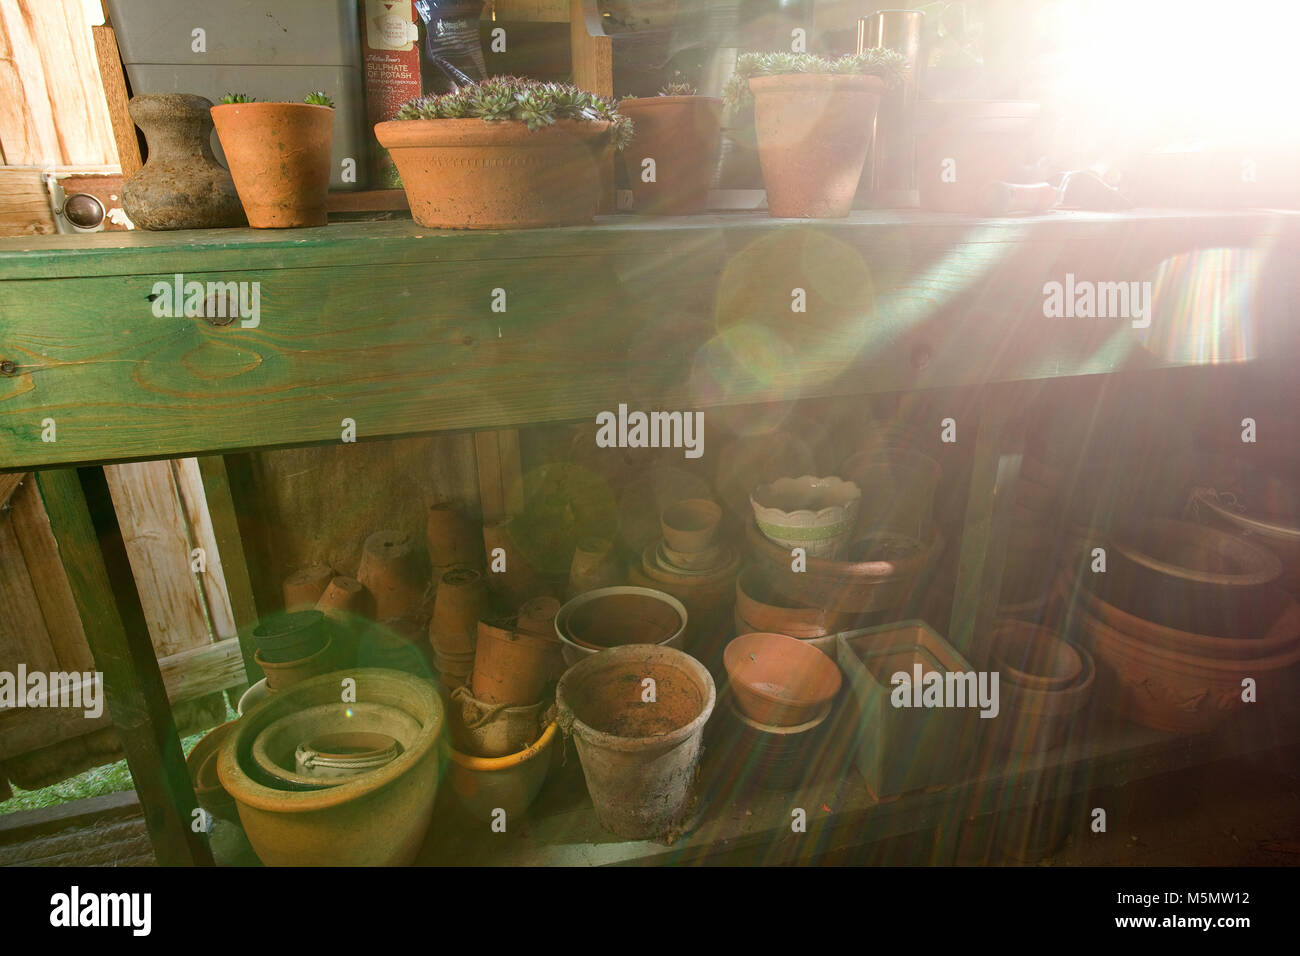 Sunlight coming through interior garden shed window. terracotta plant pots and plants Stock Photo